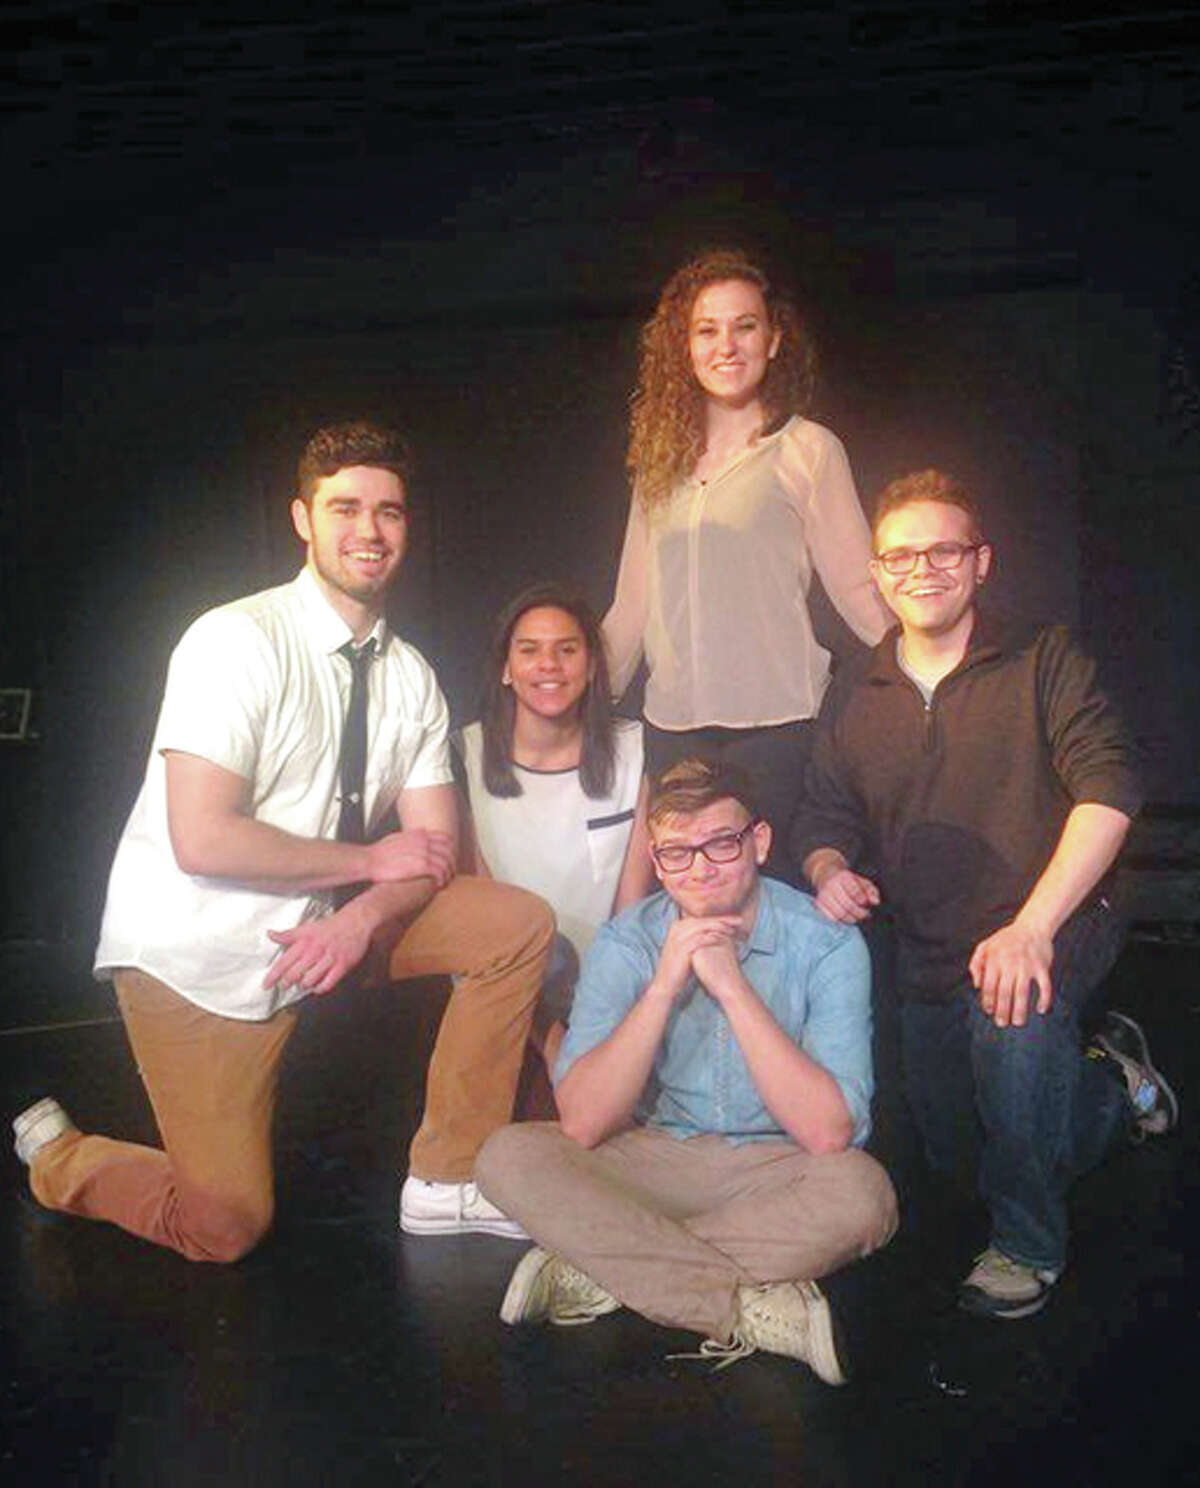 Members of the Let’s Make Up improve troupe will perform Sunday at Playhouse on the Square during a taping of a CassComm cable television program. The taping is free and open to the public.